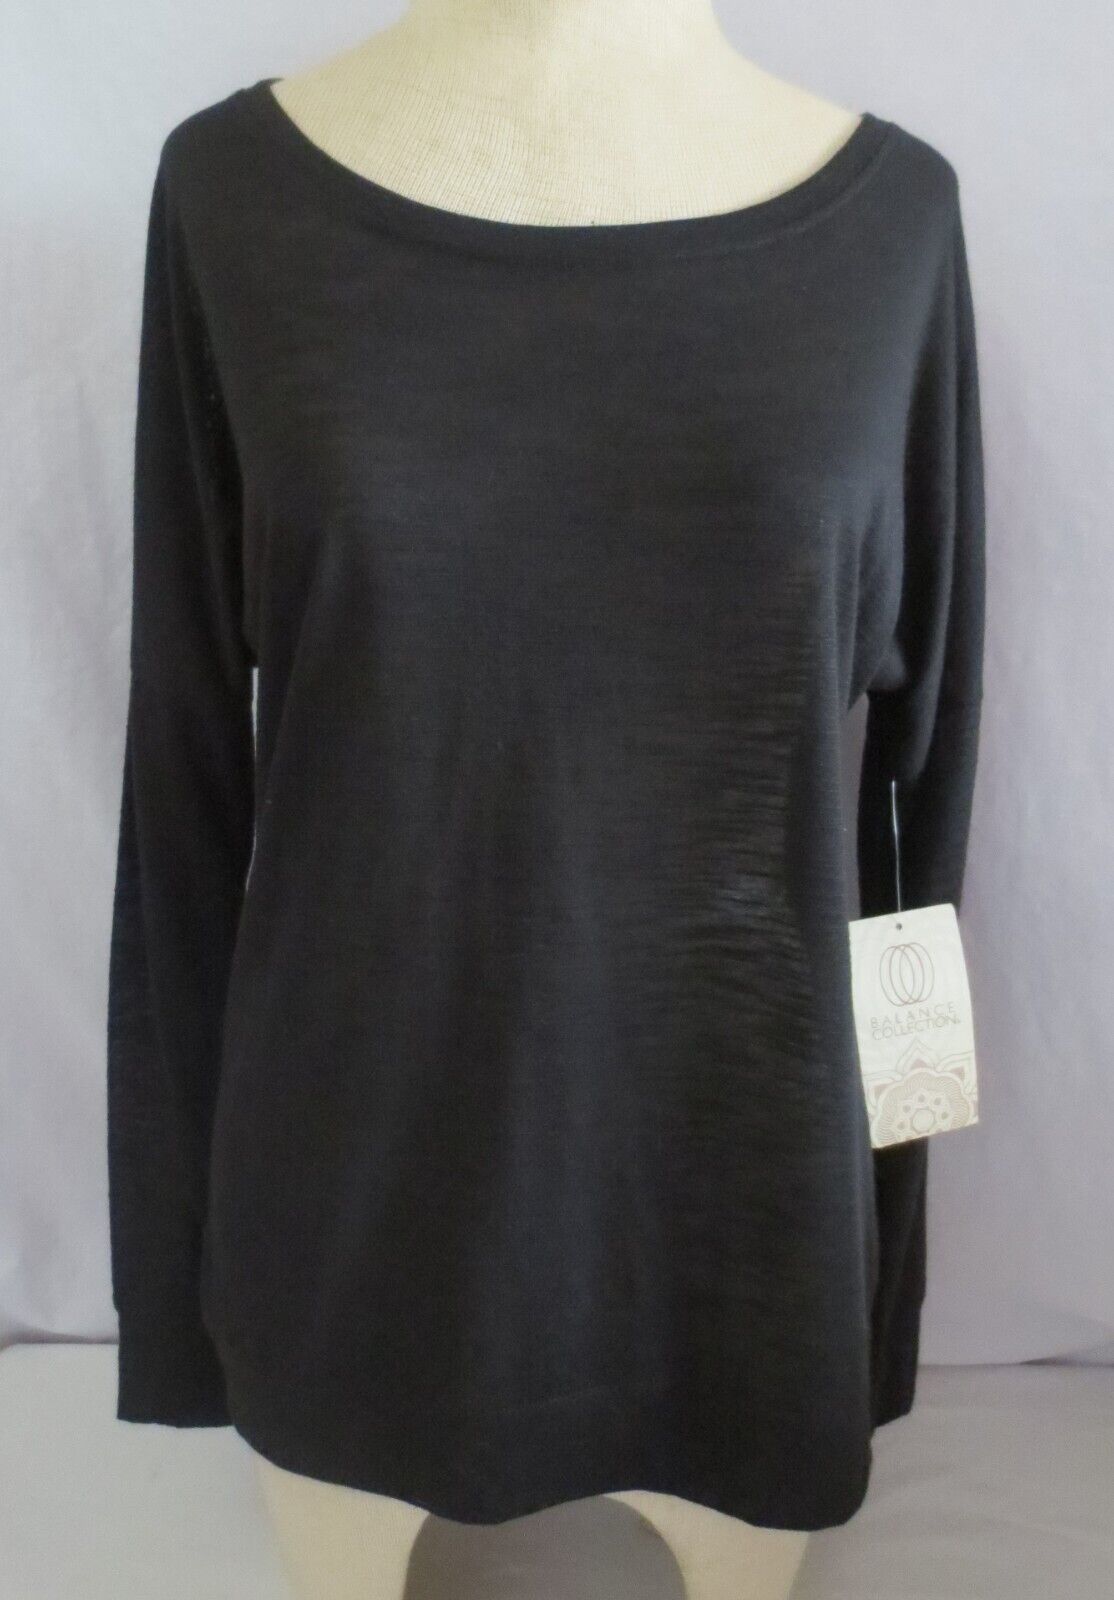 Primary image for NWT Balance Collection Mesh Panel Back BLACK Workout Top Size M